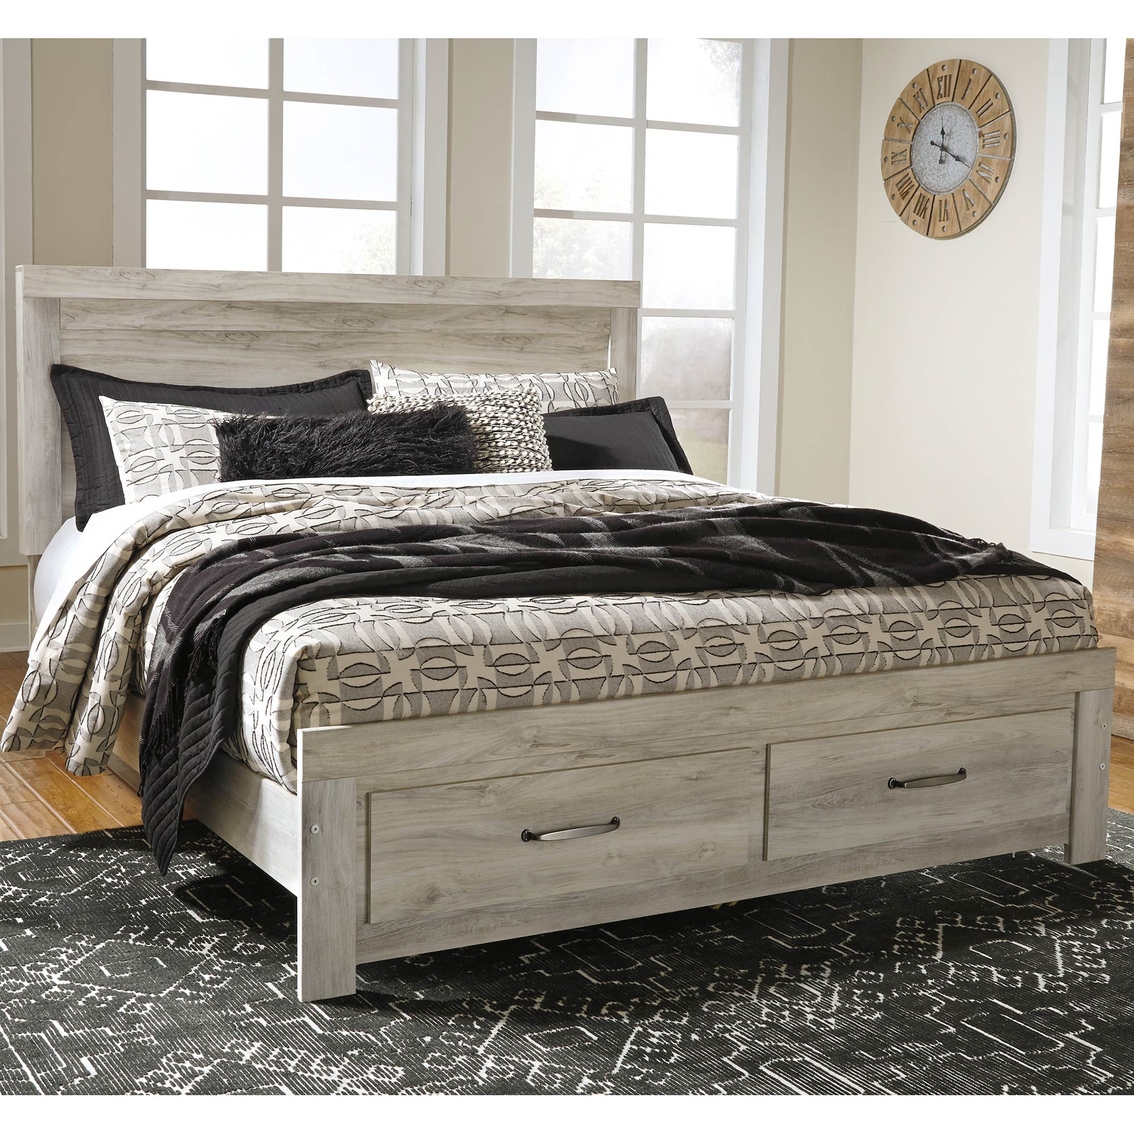 Signature Design by Ashley Bellaby 5 pc. Storage Bed Set - Image 2 of 4